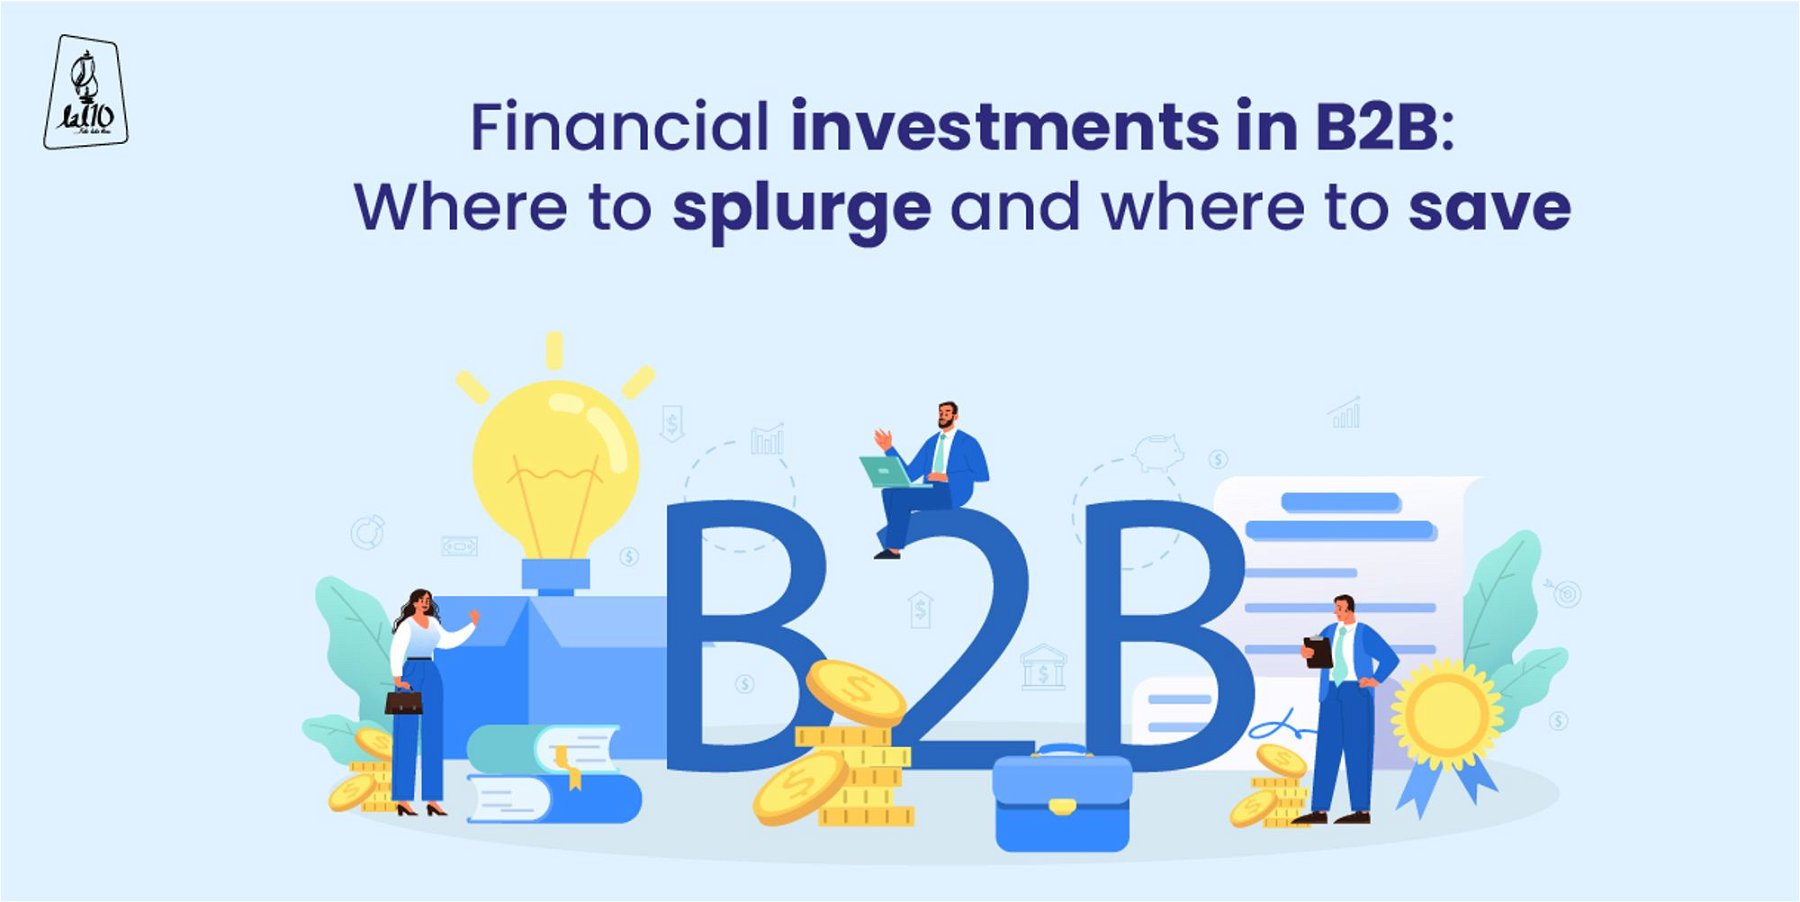 Financial investments in B2B: Where to splurge and where to save